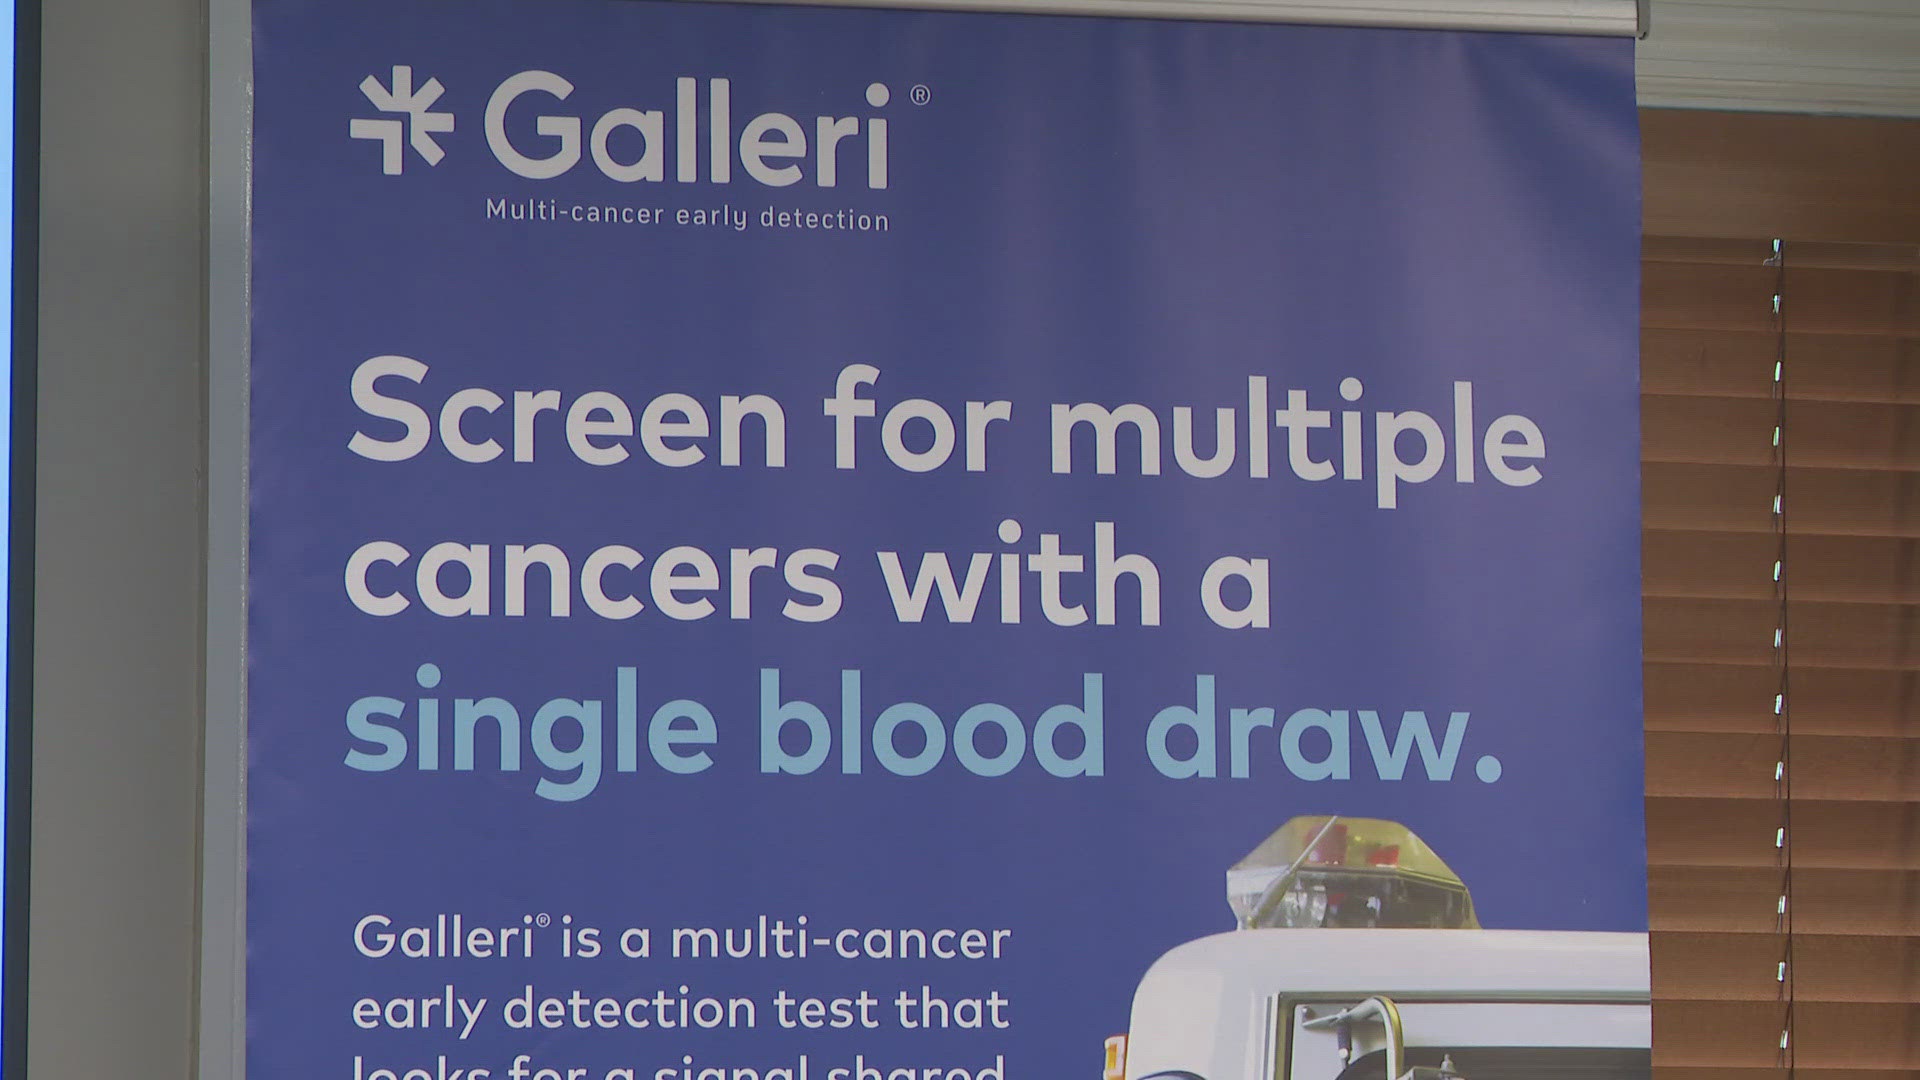 The Grail Galleri test can screen for fifty different types of cancer. University Hospitals Seidman Cancer Center is now offering the test to first responders.